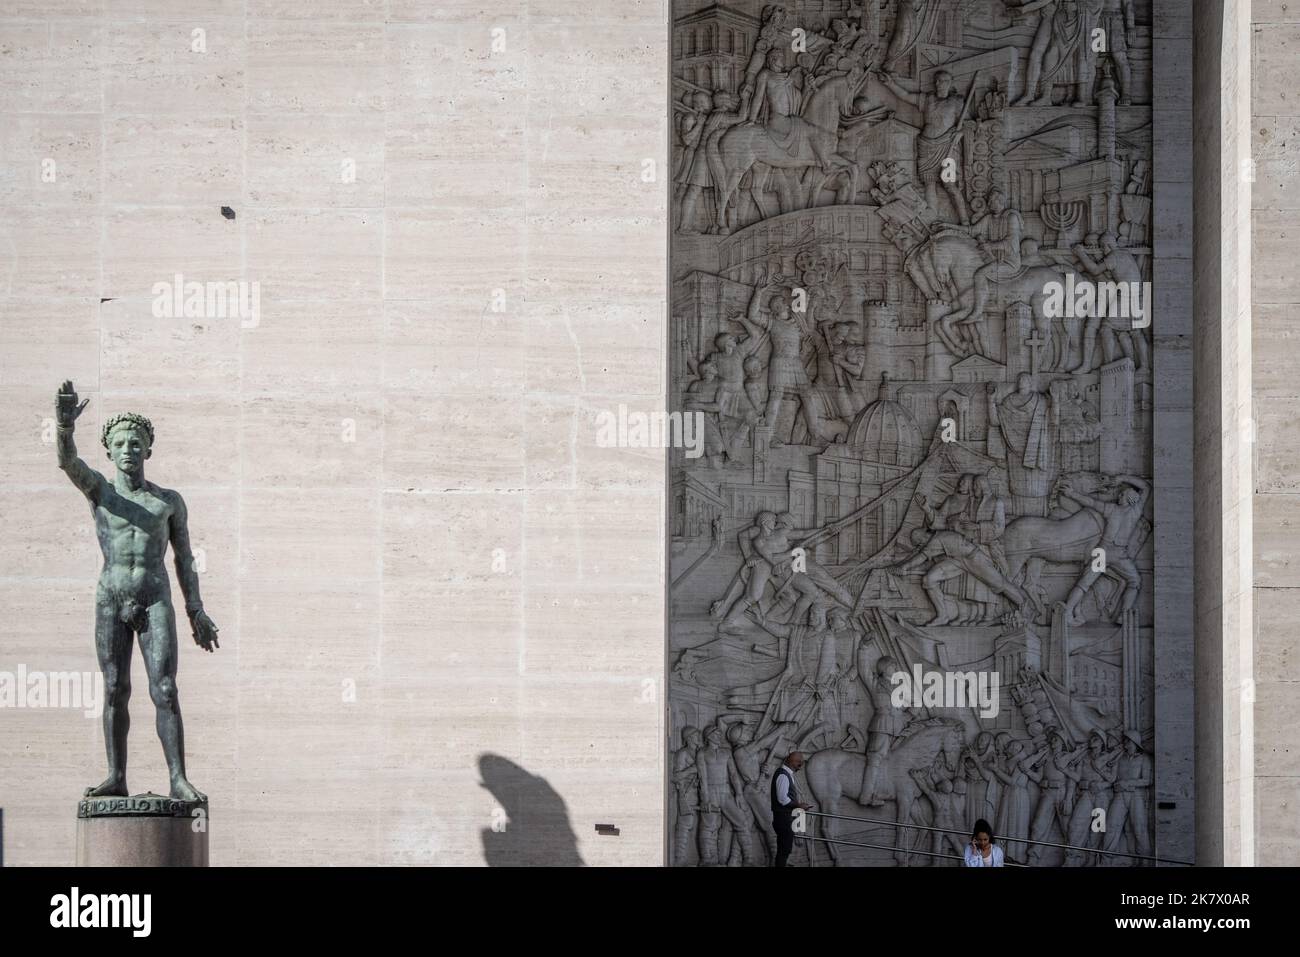 Rom, Italy. 19th Oct, 2022. People stand in front of the entrance of Palazzo degli Uffici in front of a relief by artist Publio Morbiducci that shows, among others, former Italian dictator Mussolini sitting on a horse. (to dpa 'Ahead of 100th anniversary of the seizure of power by the fascists in Italy') Credit: Oliver Weiken/dpa/Alamy Live News Stock Photo